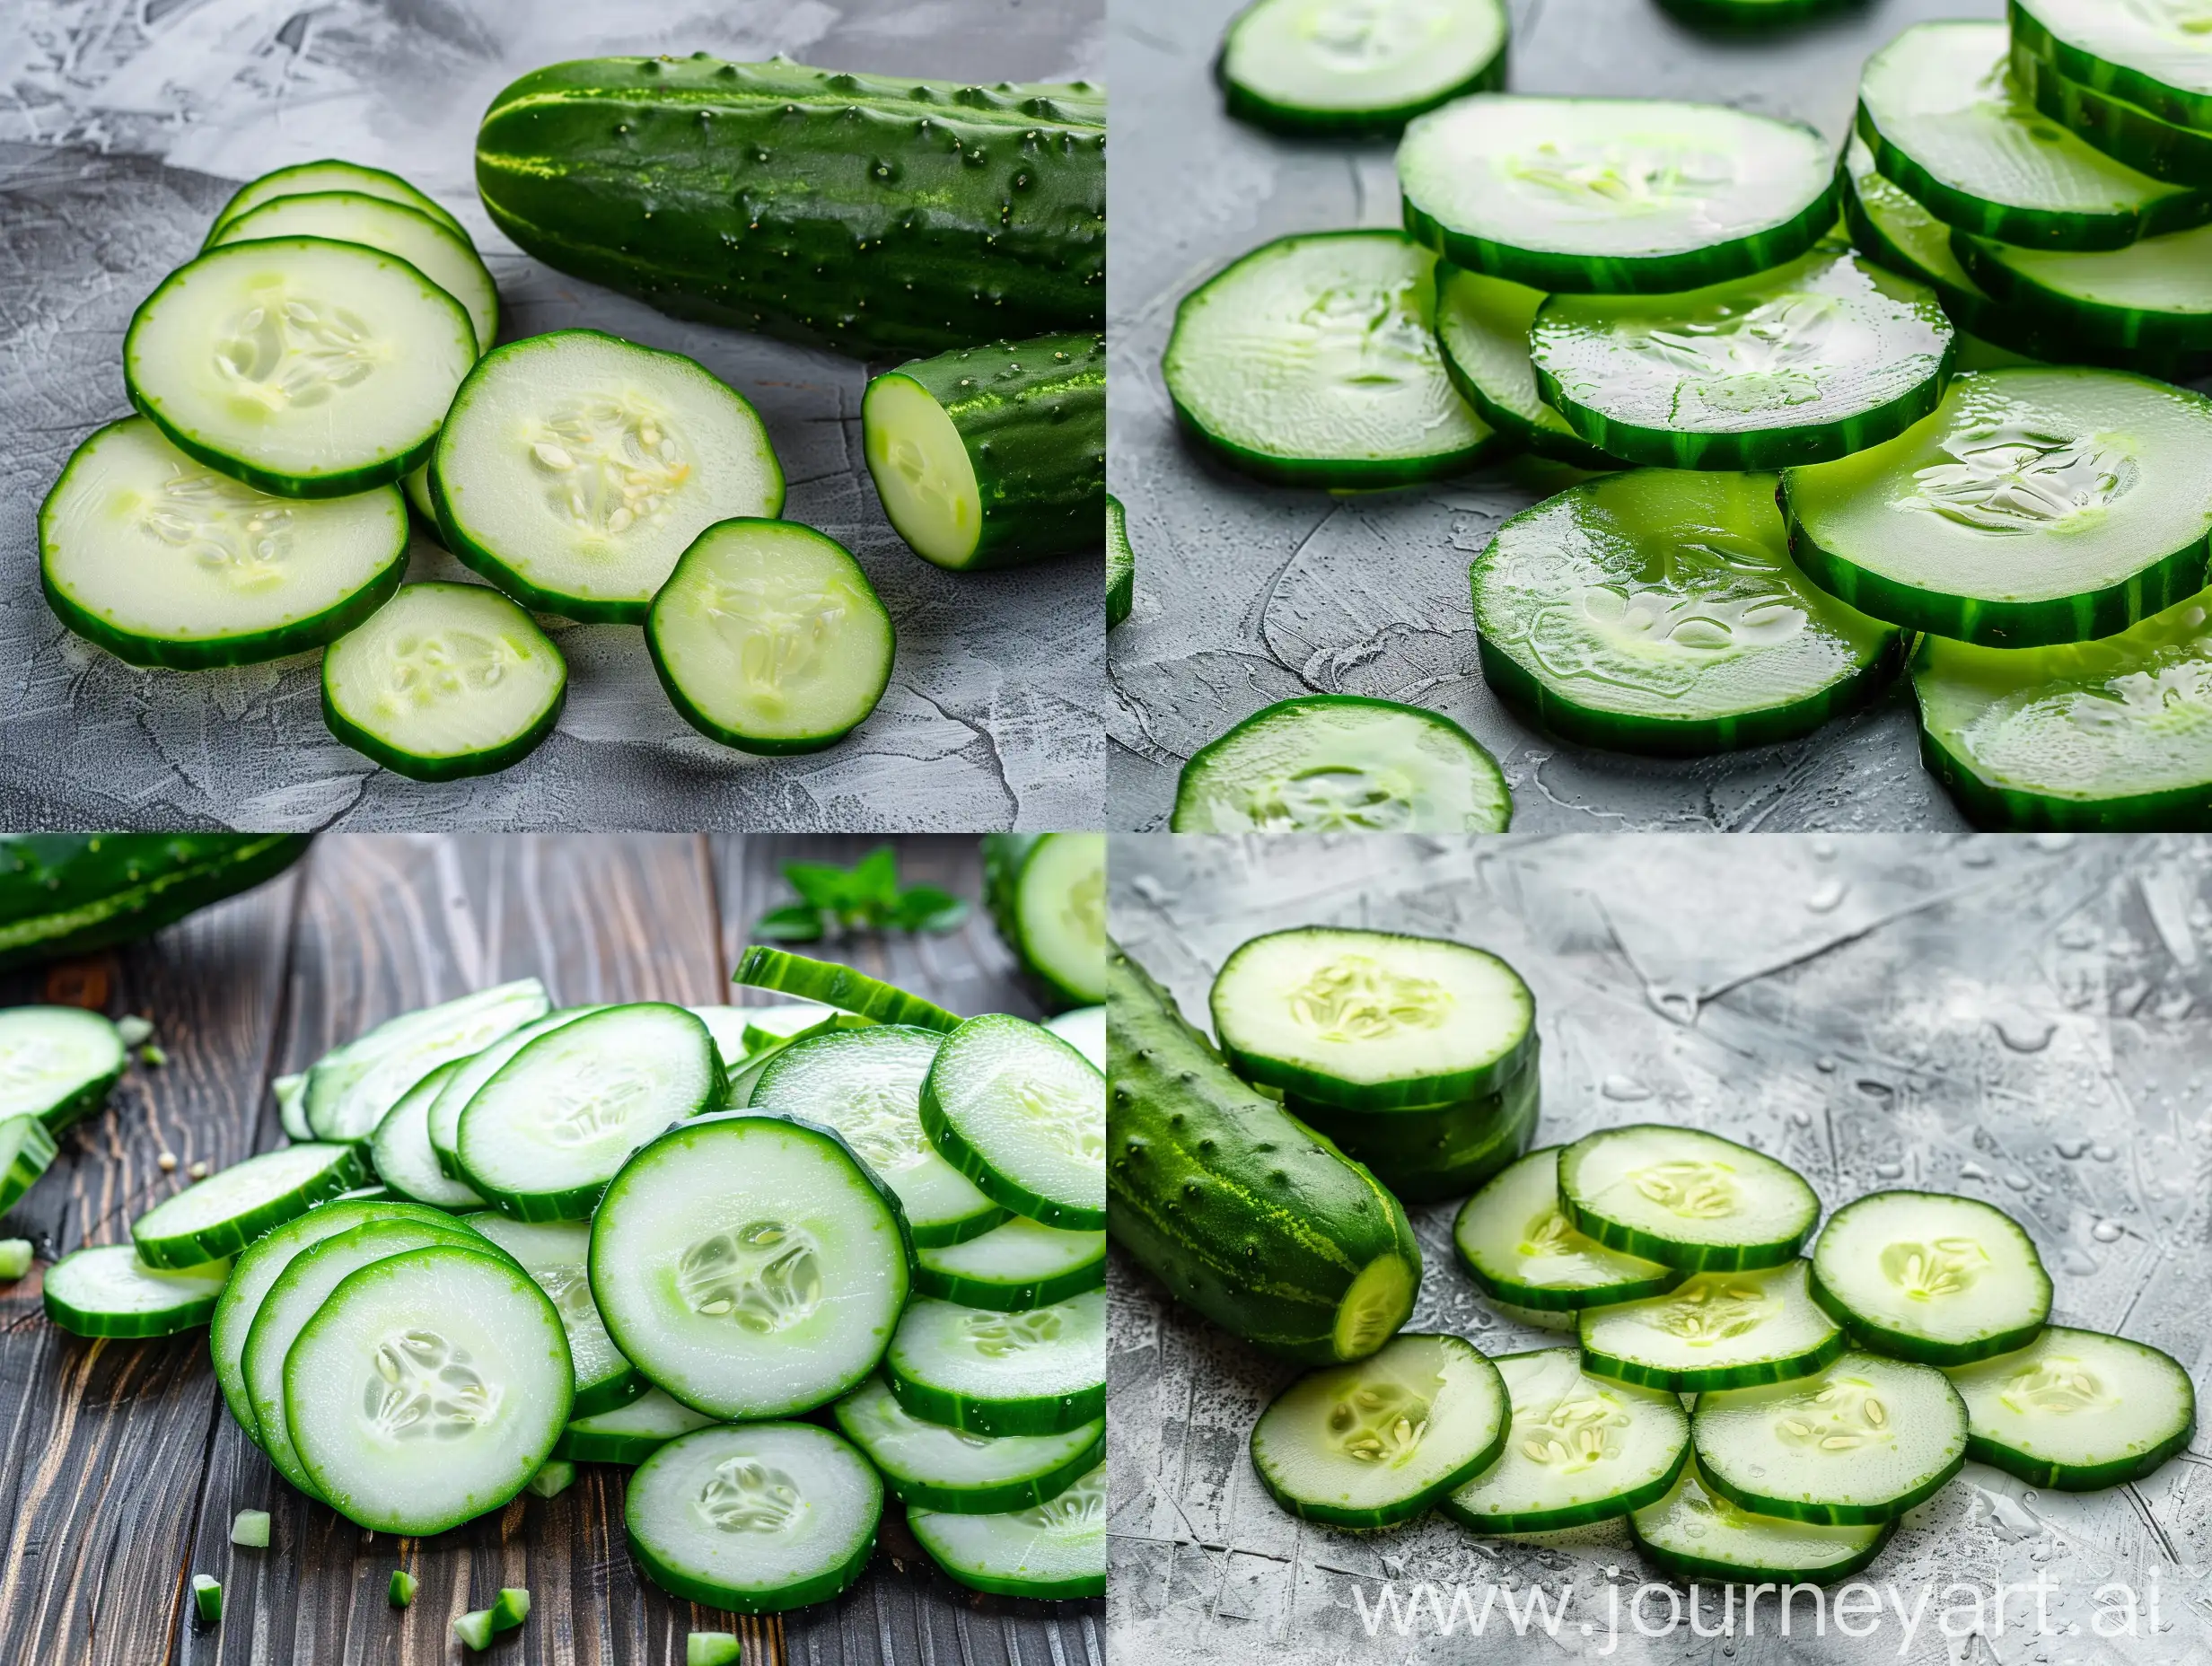 Real photo with natural light of some sliced cucumbers